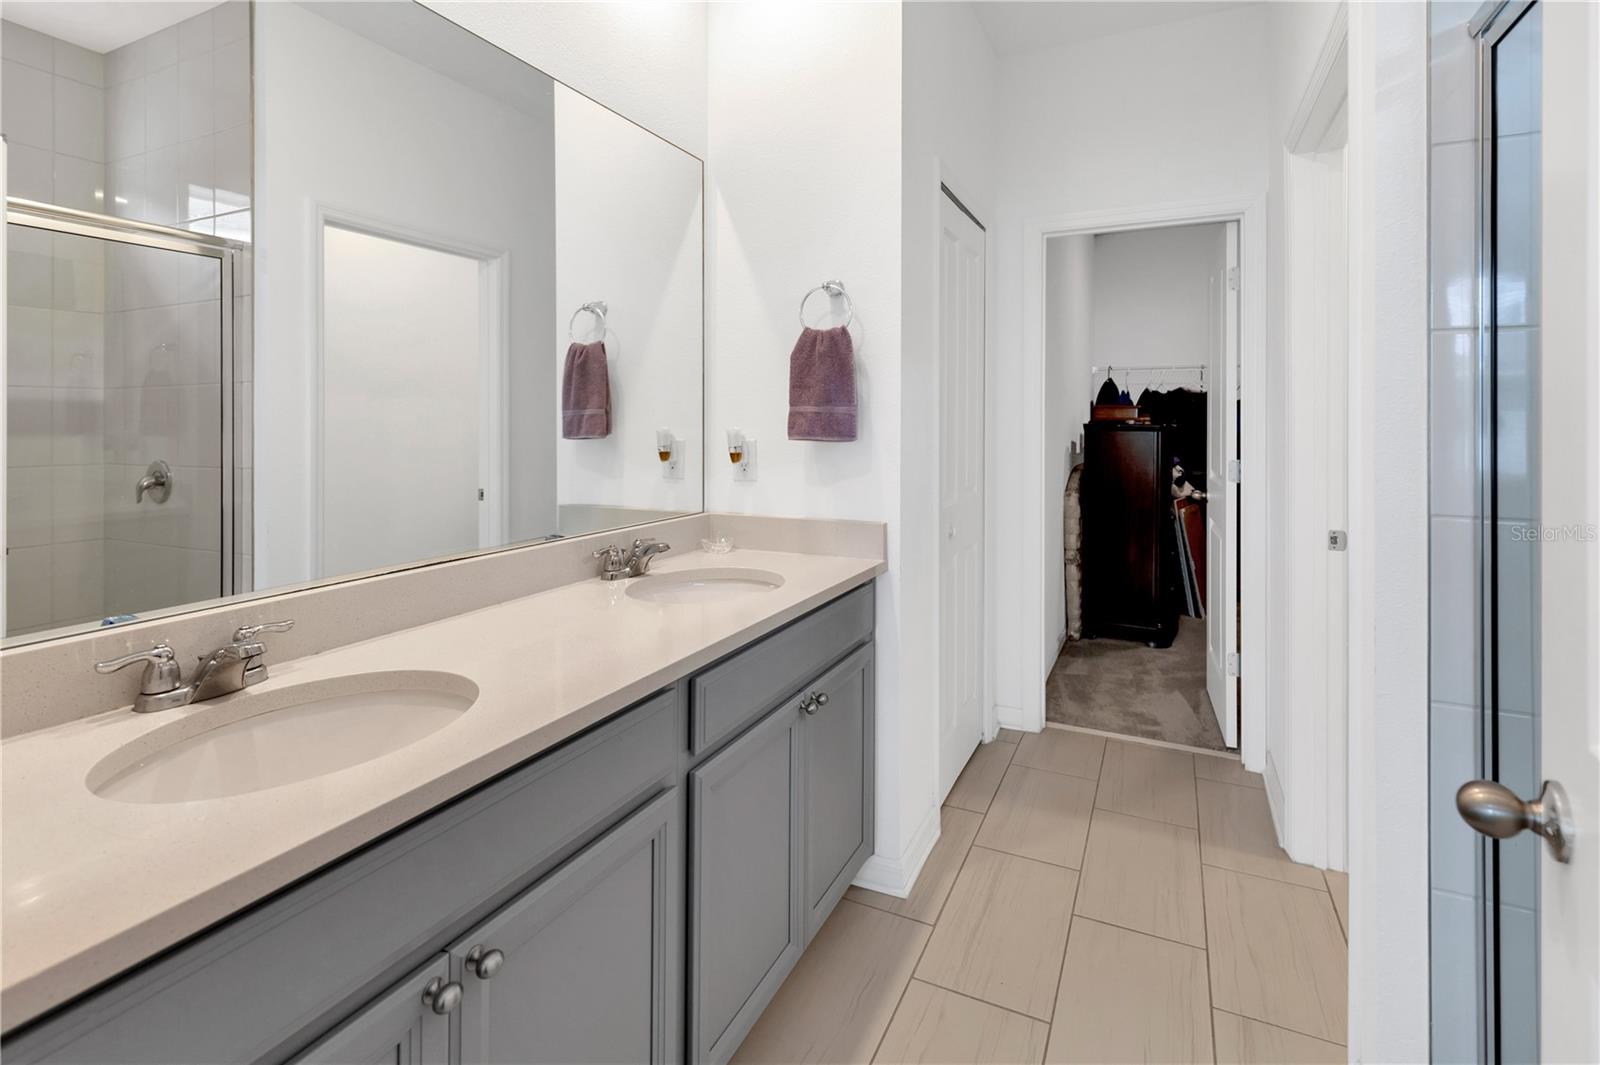 Double vanity,  large walk-in shower and separate water closet to the right